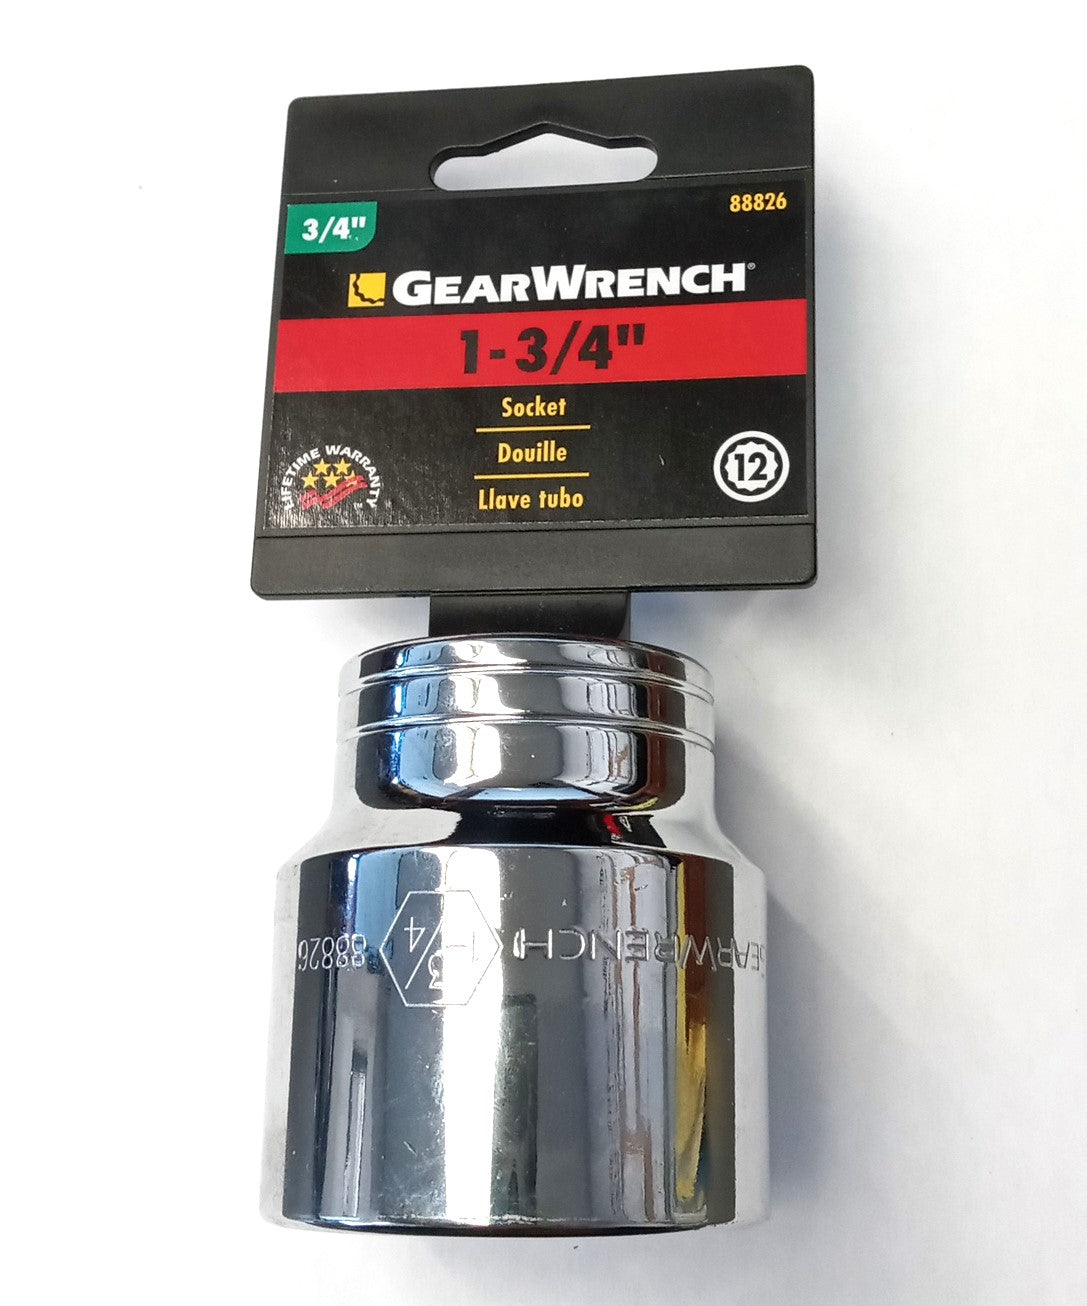 GearWrench 88826 3/4" Drive 1-3/4" Socket 12 Point